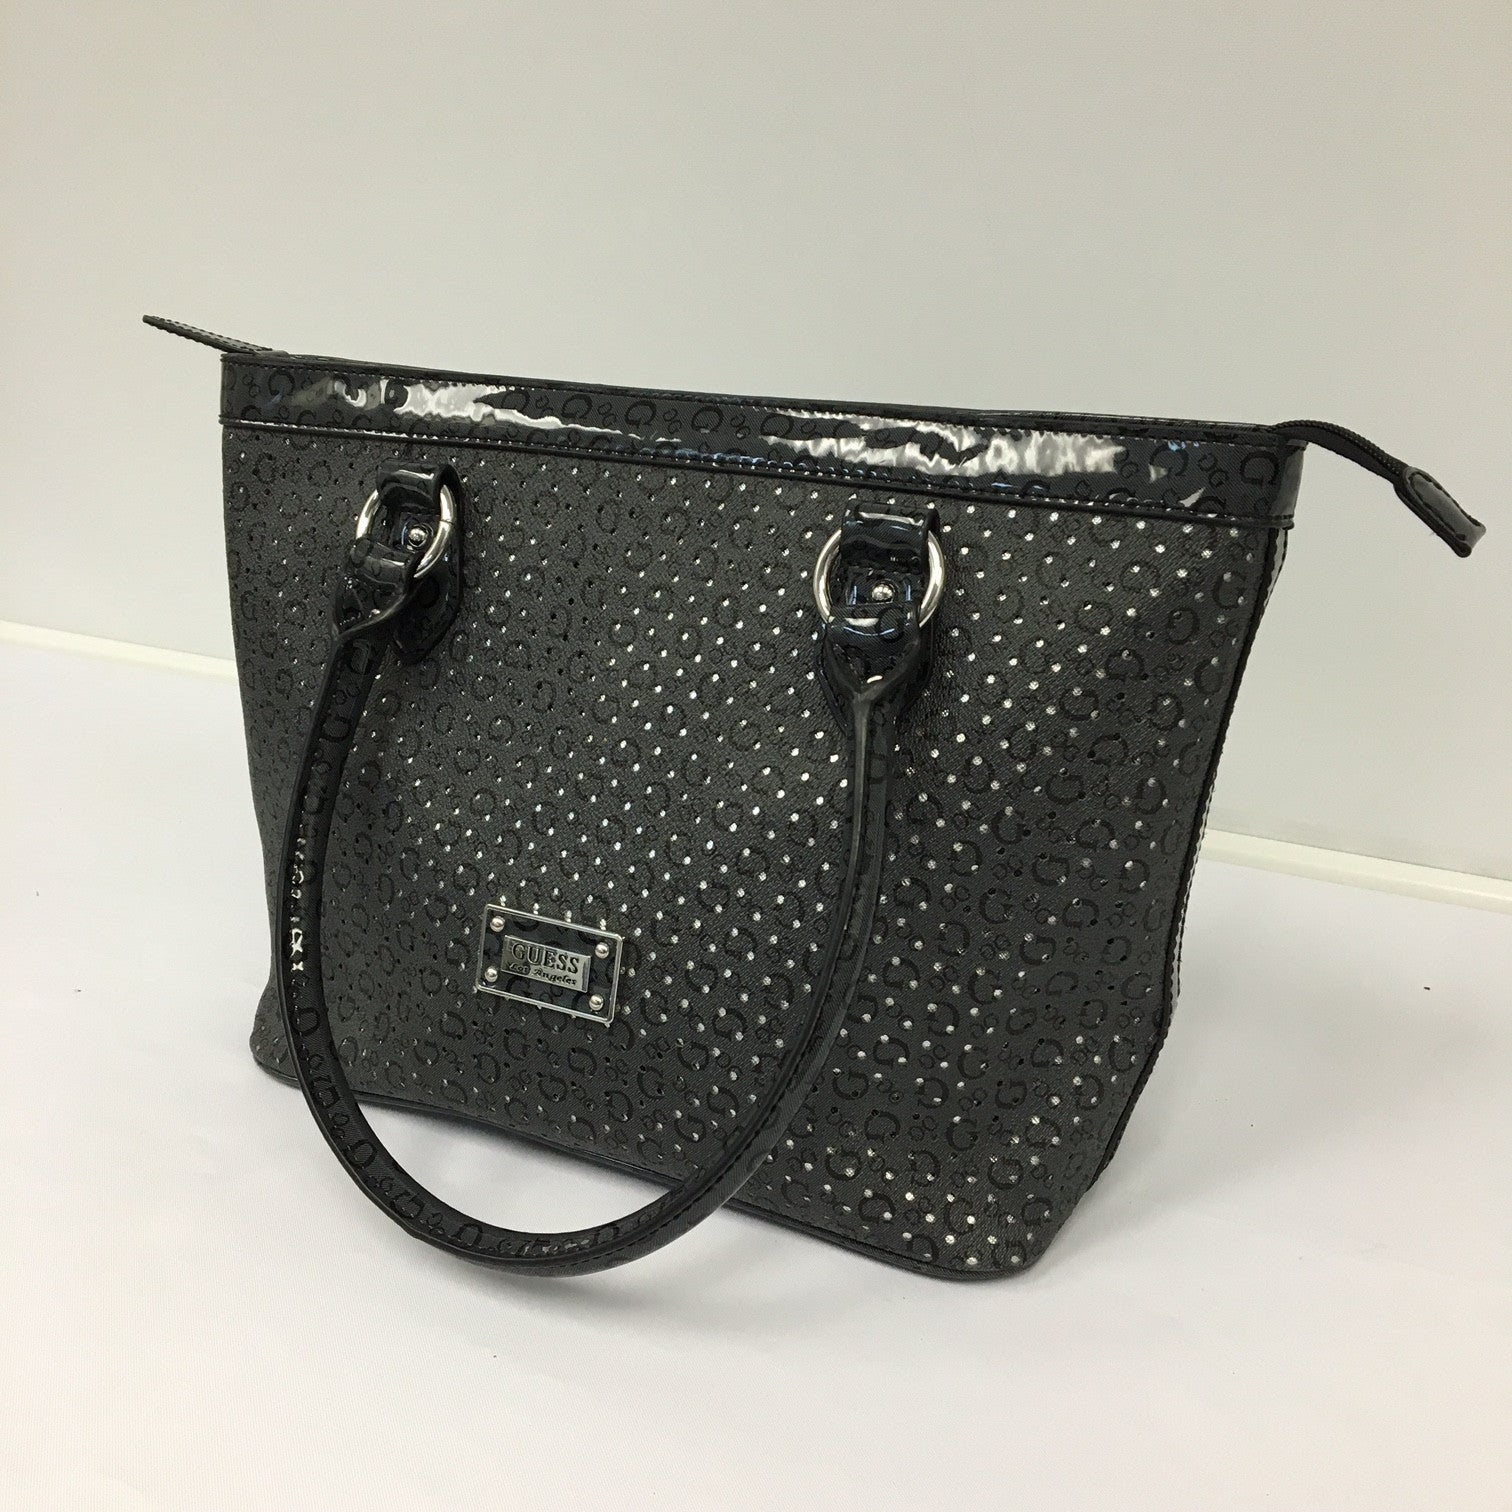 Black and Silver Guess Tote